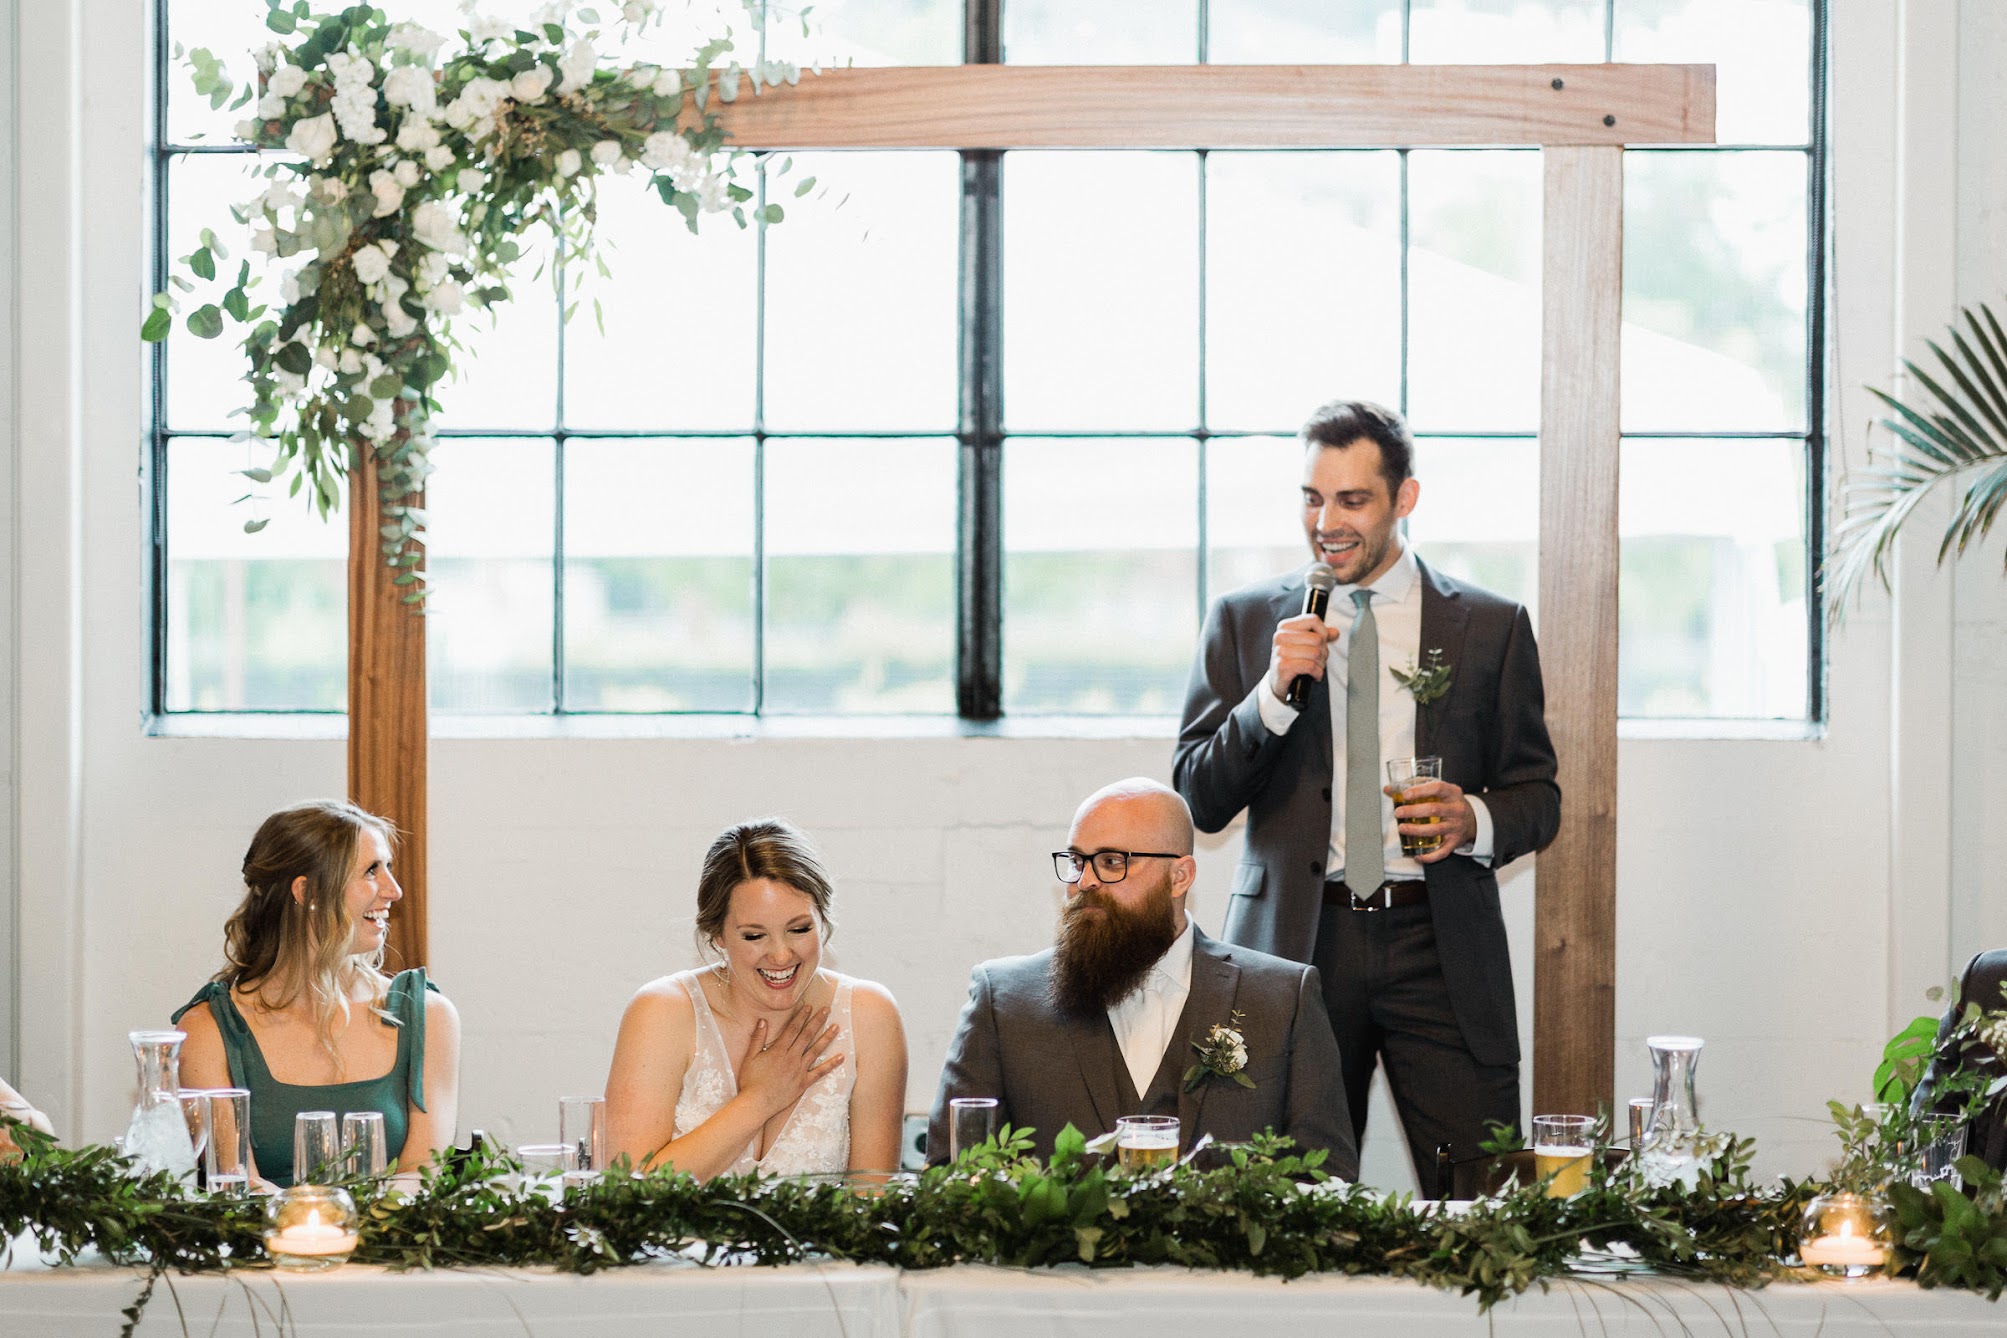 the best man standing behind the couple with a drink in his hand giving a toasts 